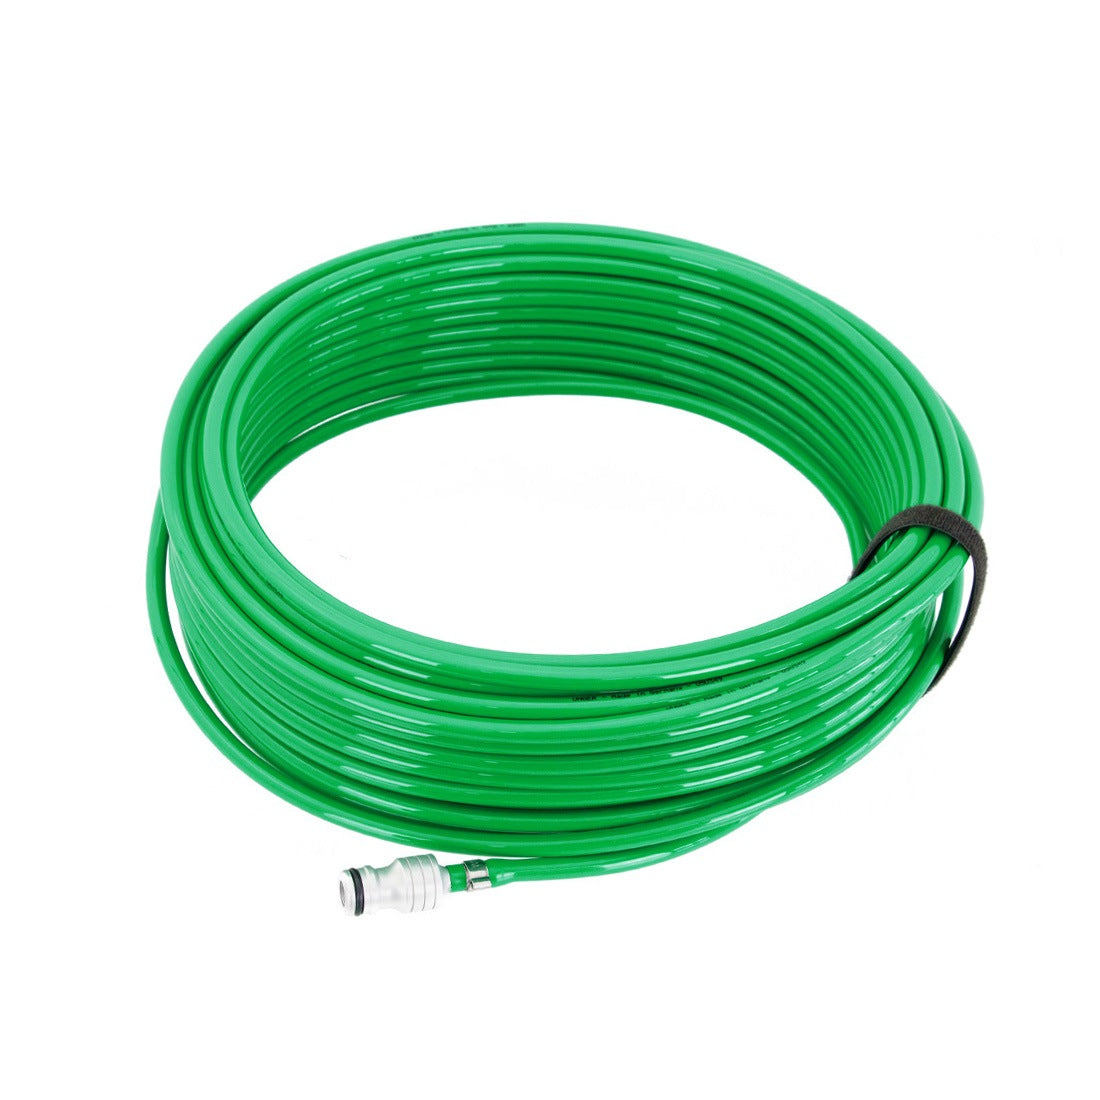 Unger HydroPower Ultra Entry Kit - 20 Feet Hose View